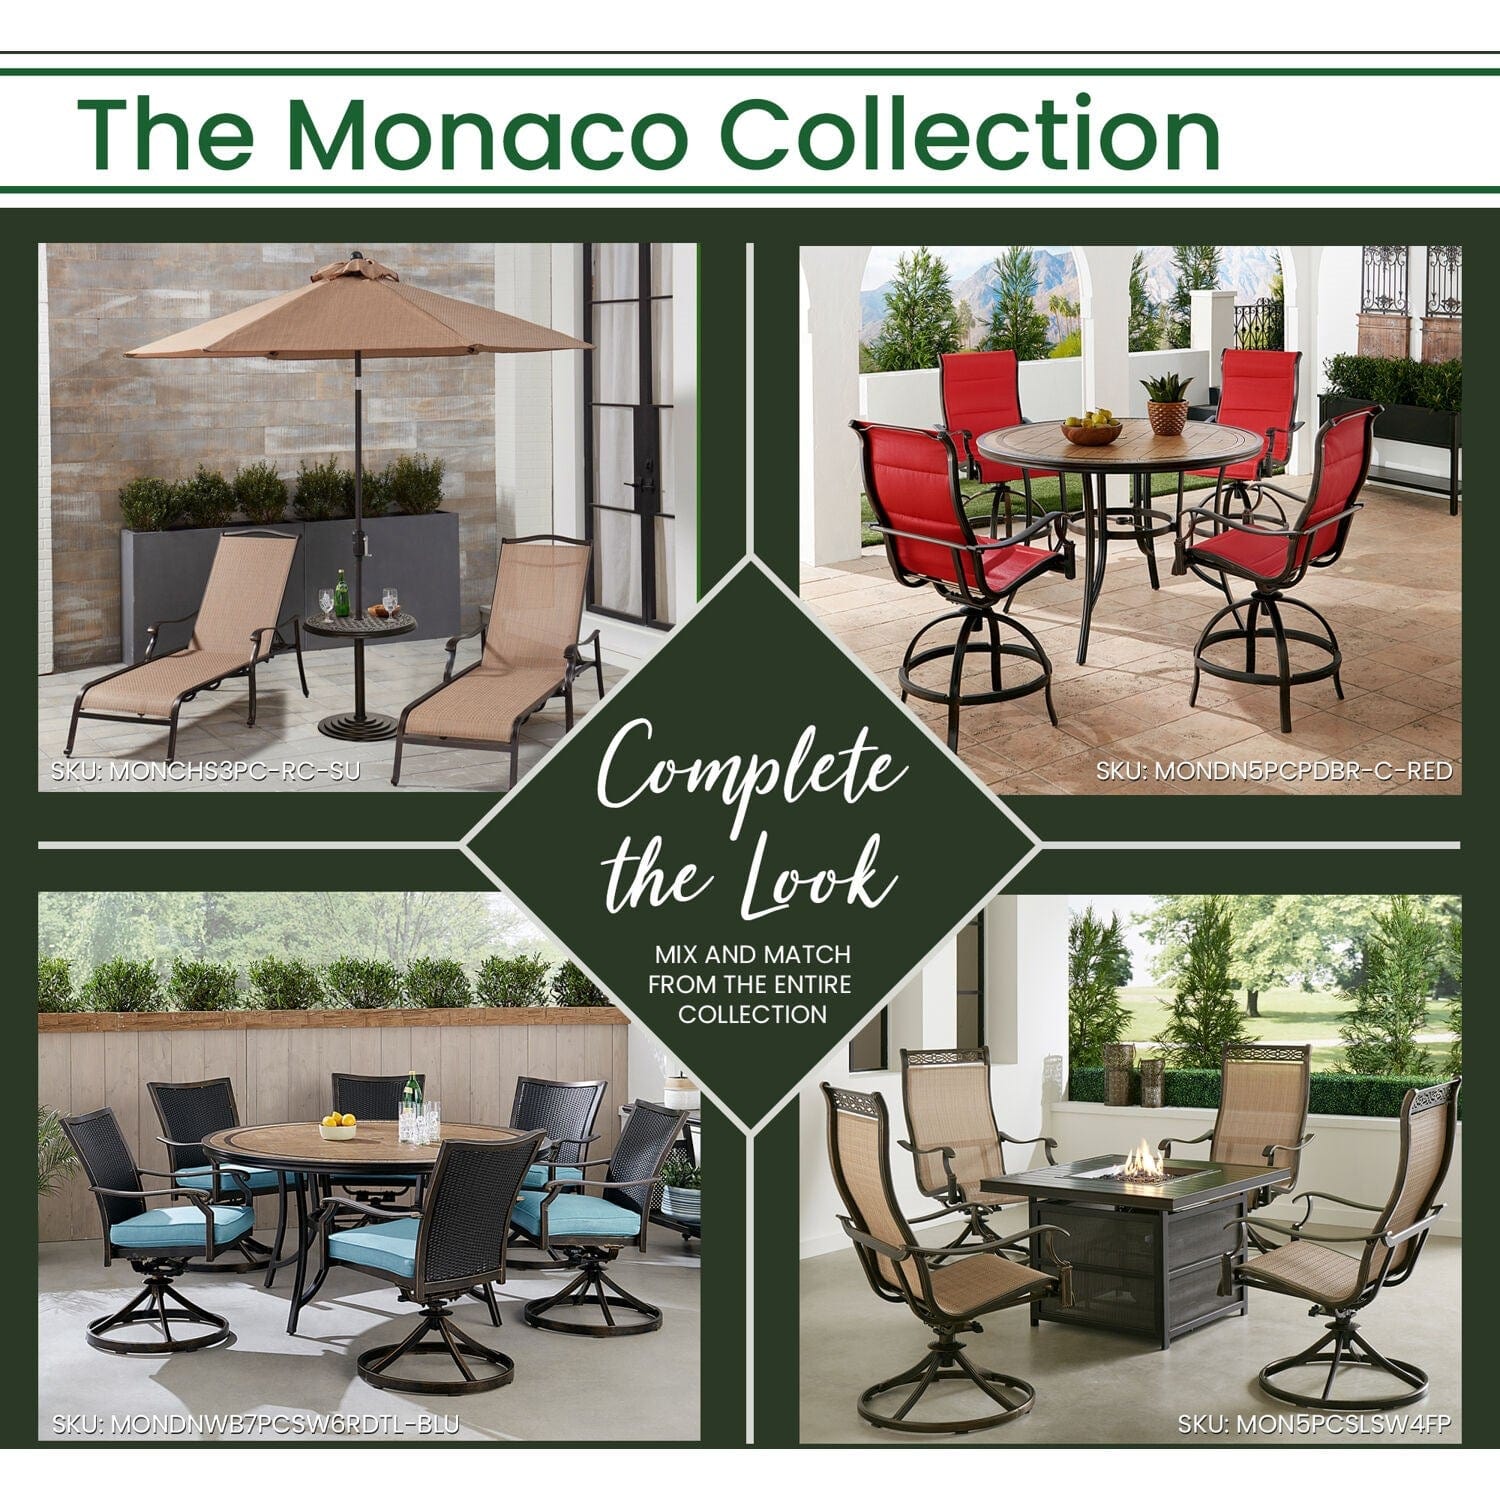 Hanover Outdoor Dining Set Hanover Monaco 5-Piece Dining Set in Tan with 4 Cushioned Dining Chairs and a 48 In. Tile-Top Table | MONDN5PC